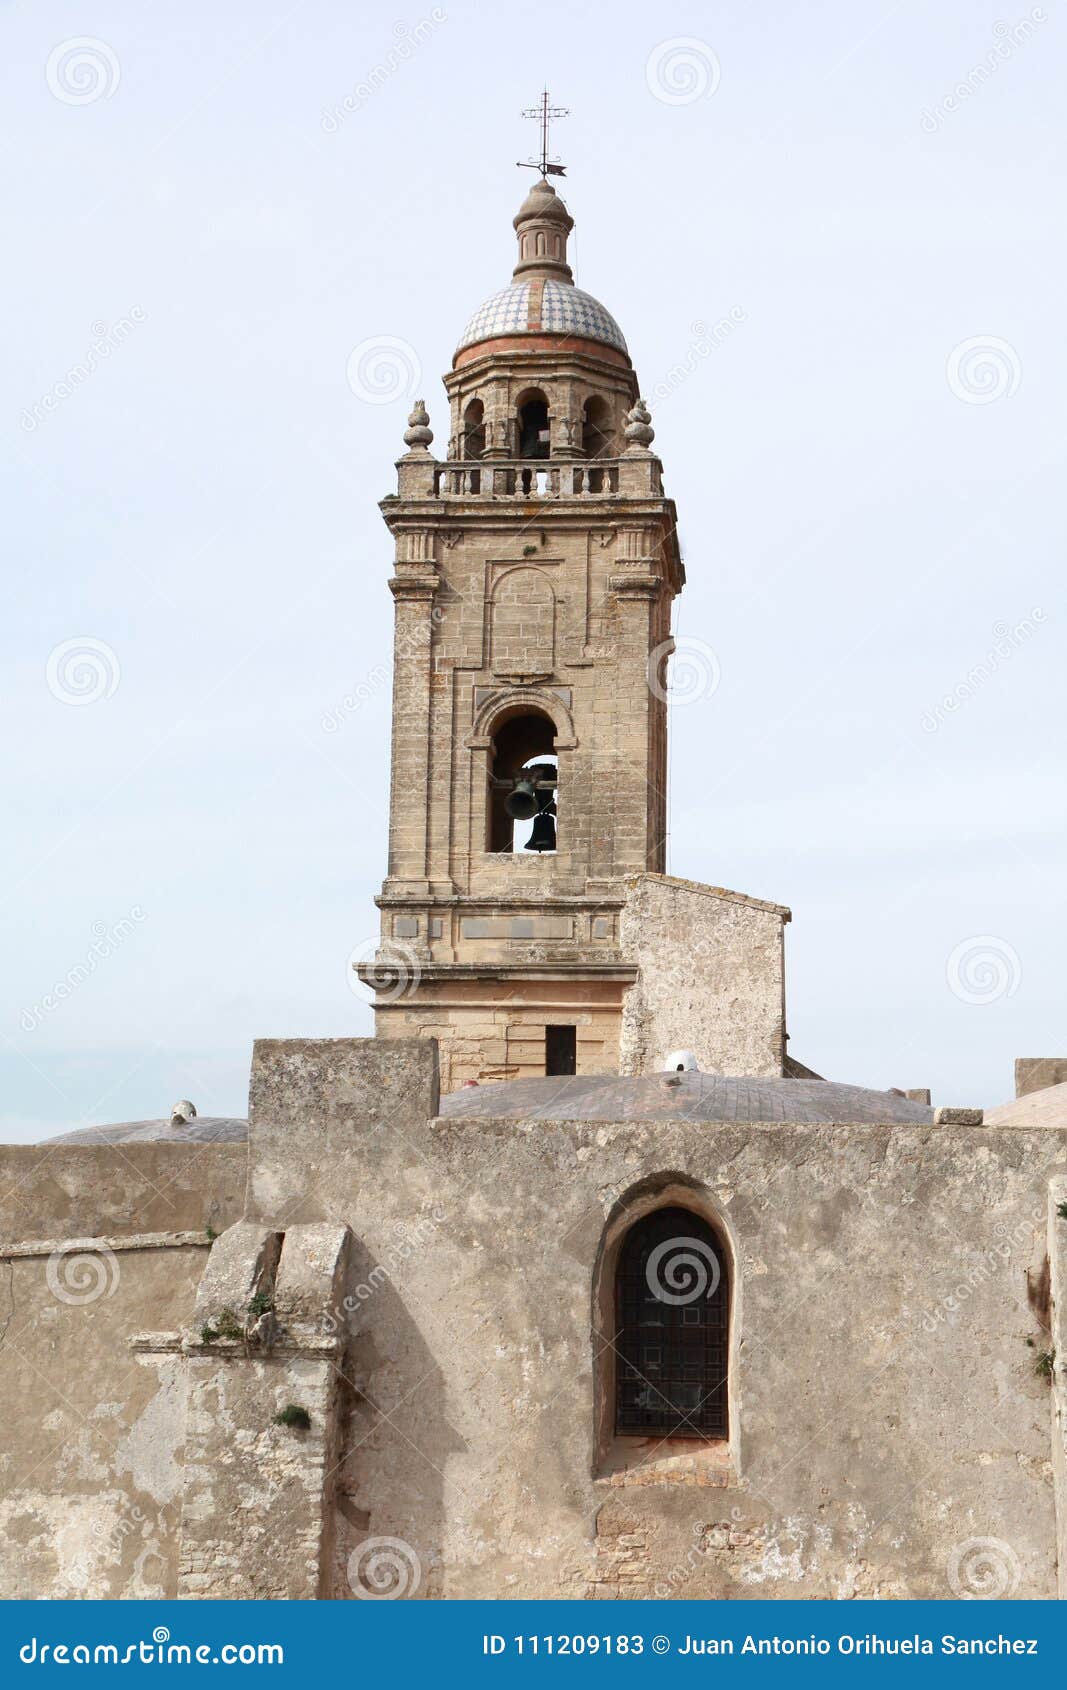 bell tower of the mayor church, in the town of medina sidonia, spain